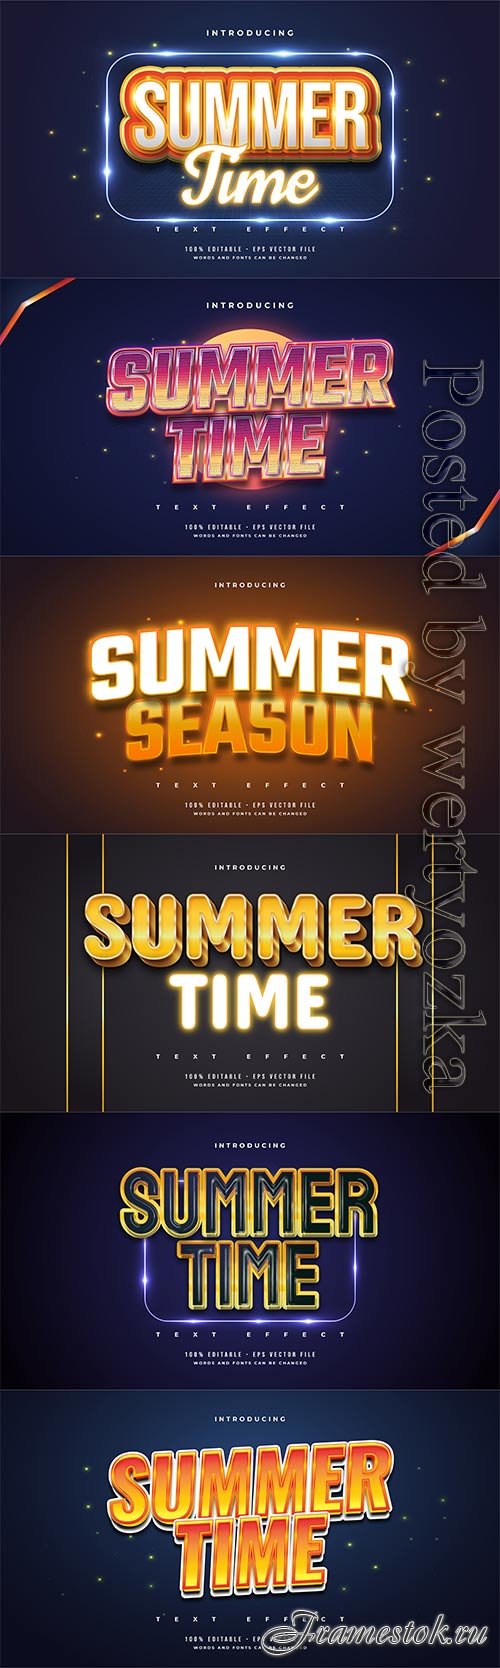 Summer time text in colorful retro style and glowing neon effect